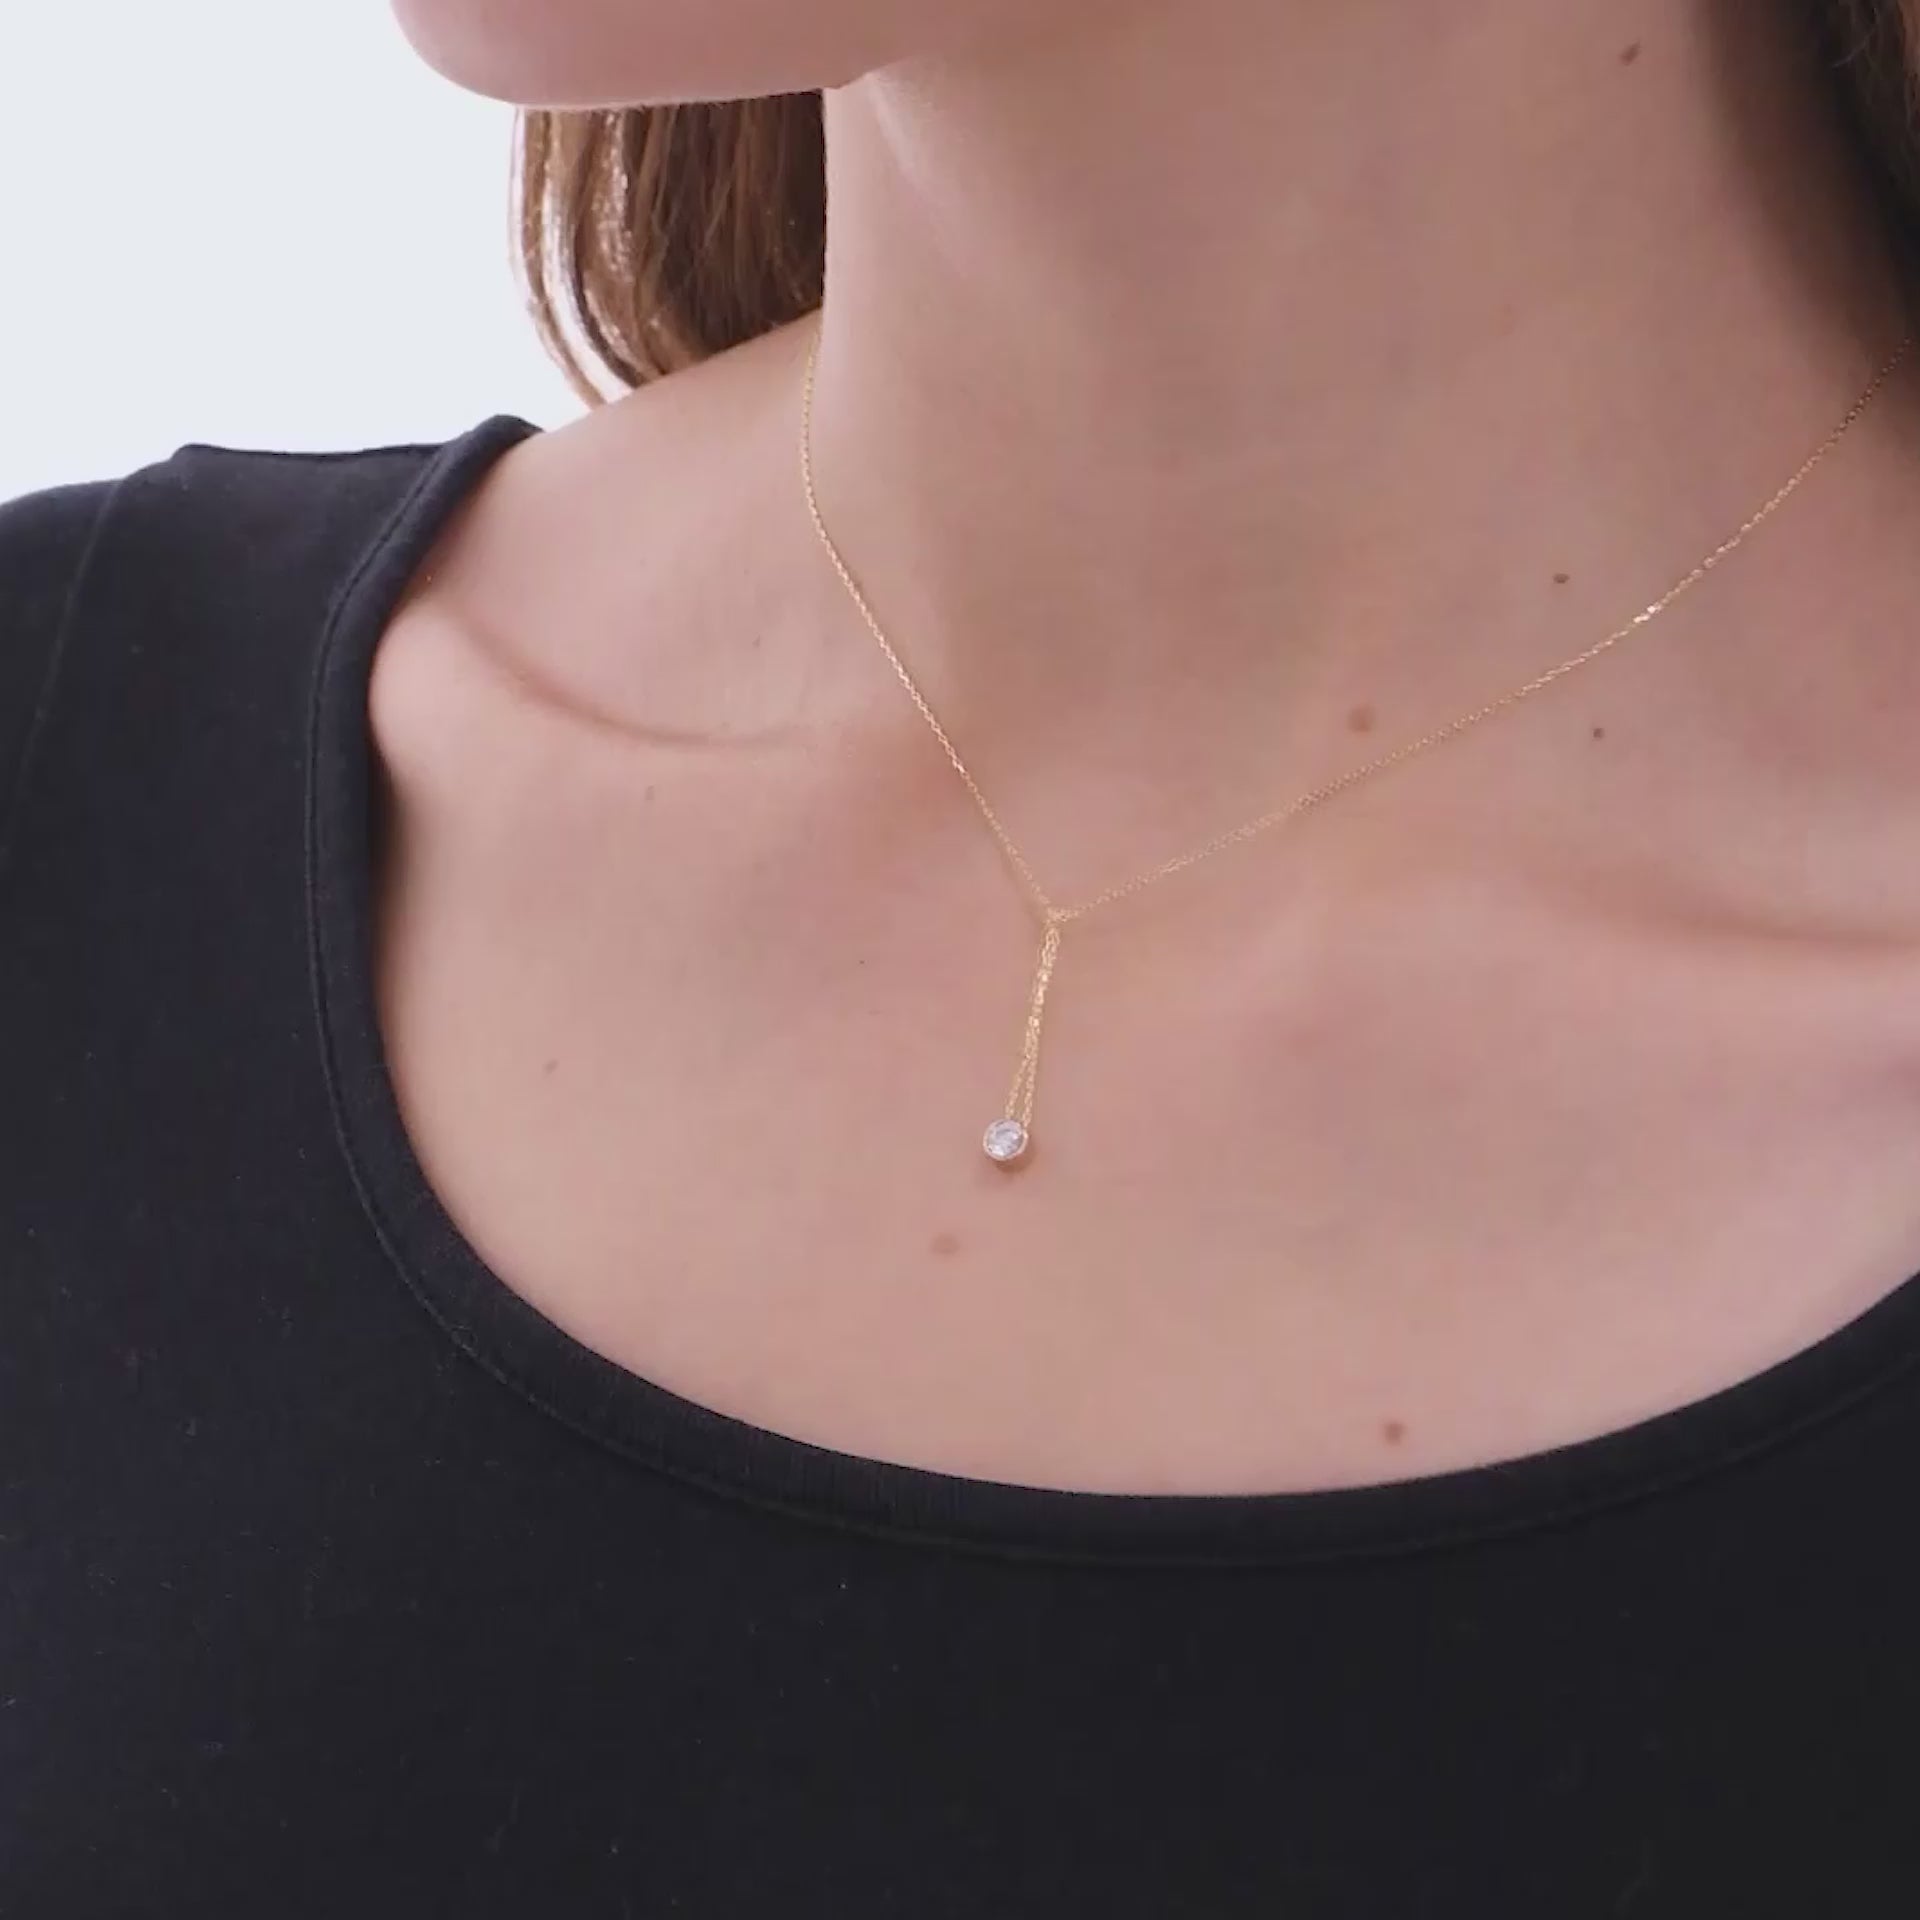 Buy Diamond Necklace / 14k Gold Necklace / Floating Diamonds Necklace /  Diamond Bubble Pendant / Birthday Gift for Her Online in India - Etsy